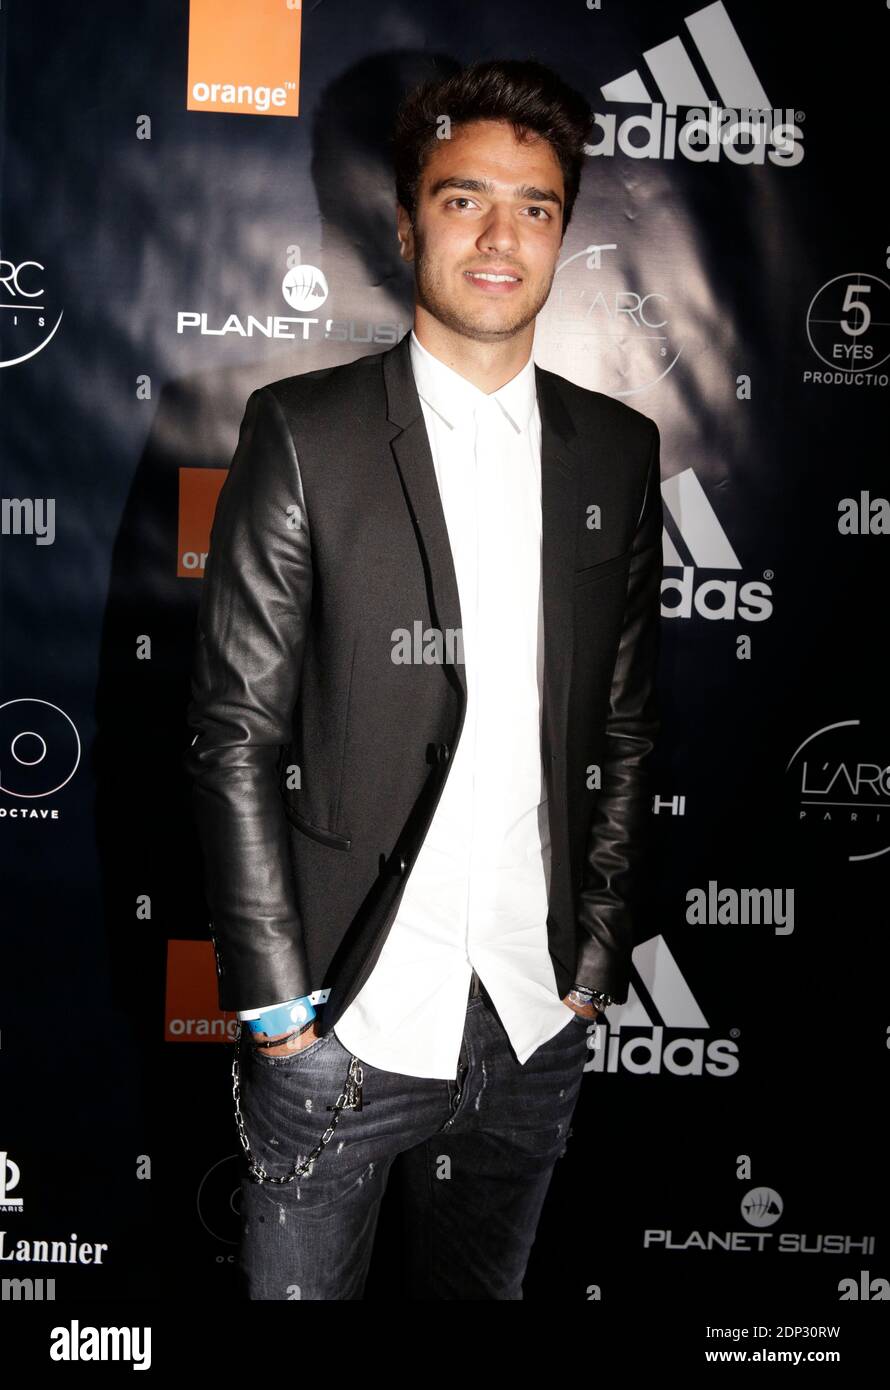 Clement Grenier attending an Adidas event held at L'Arc in Paris, France, on May 28, 2015. Photo by ABACAPRESS.COM Stock Photo